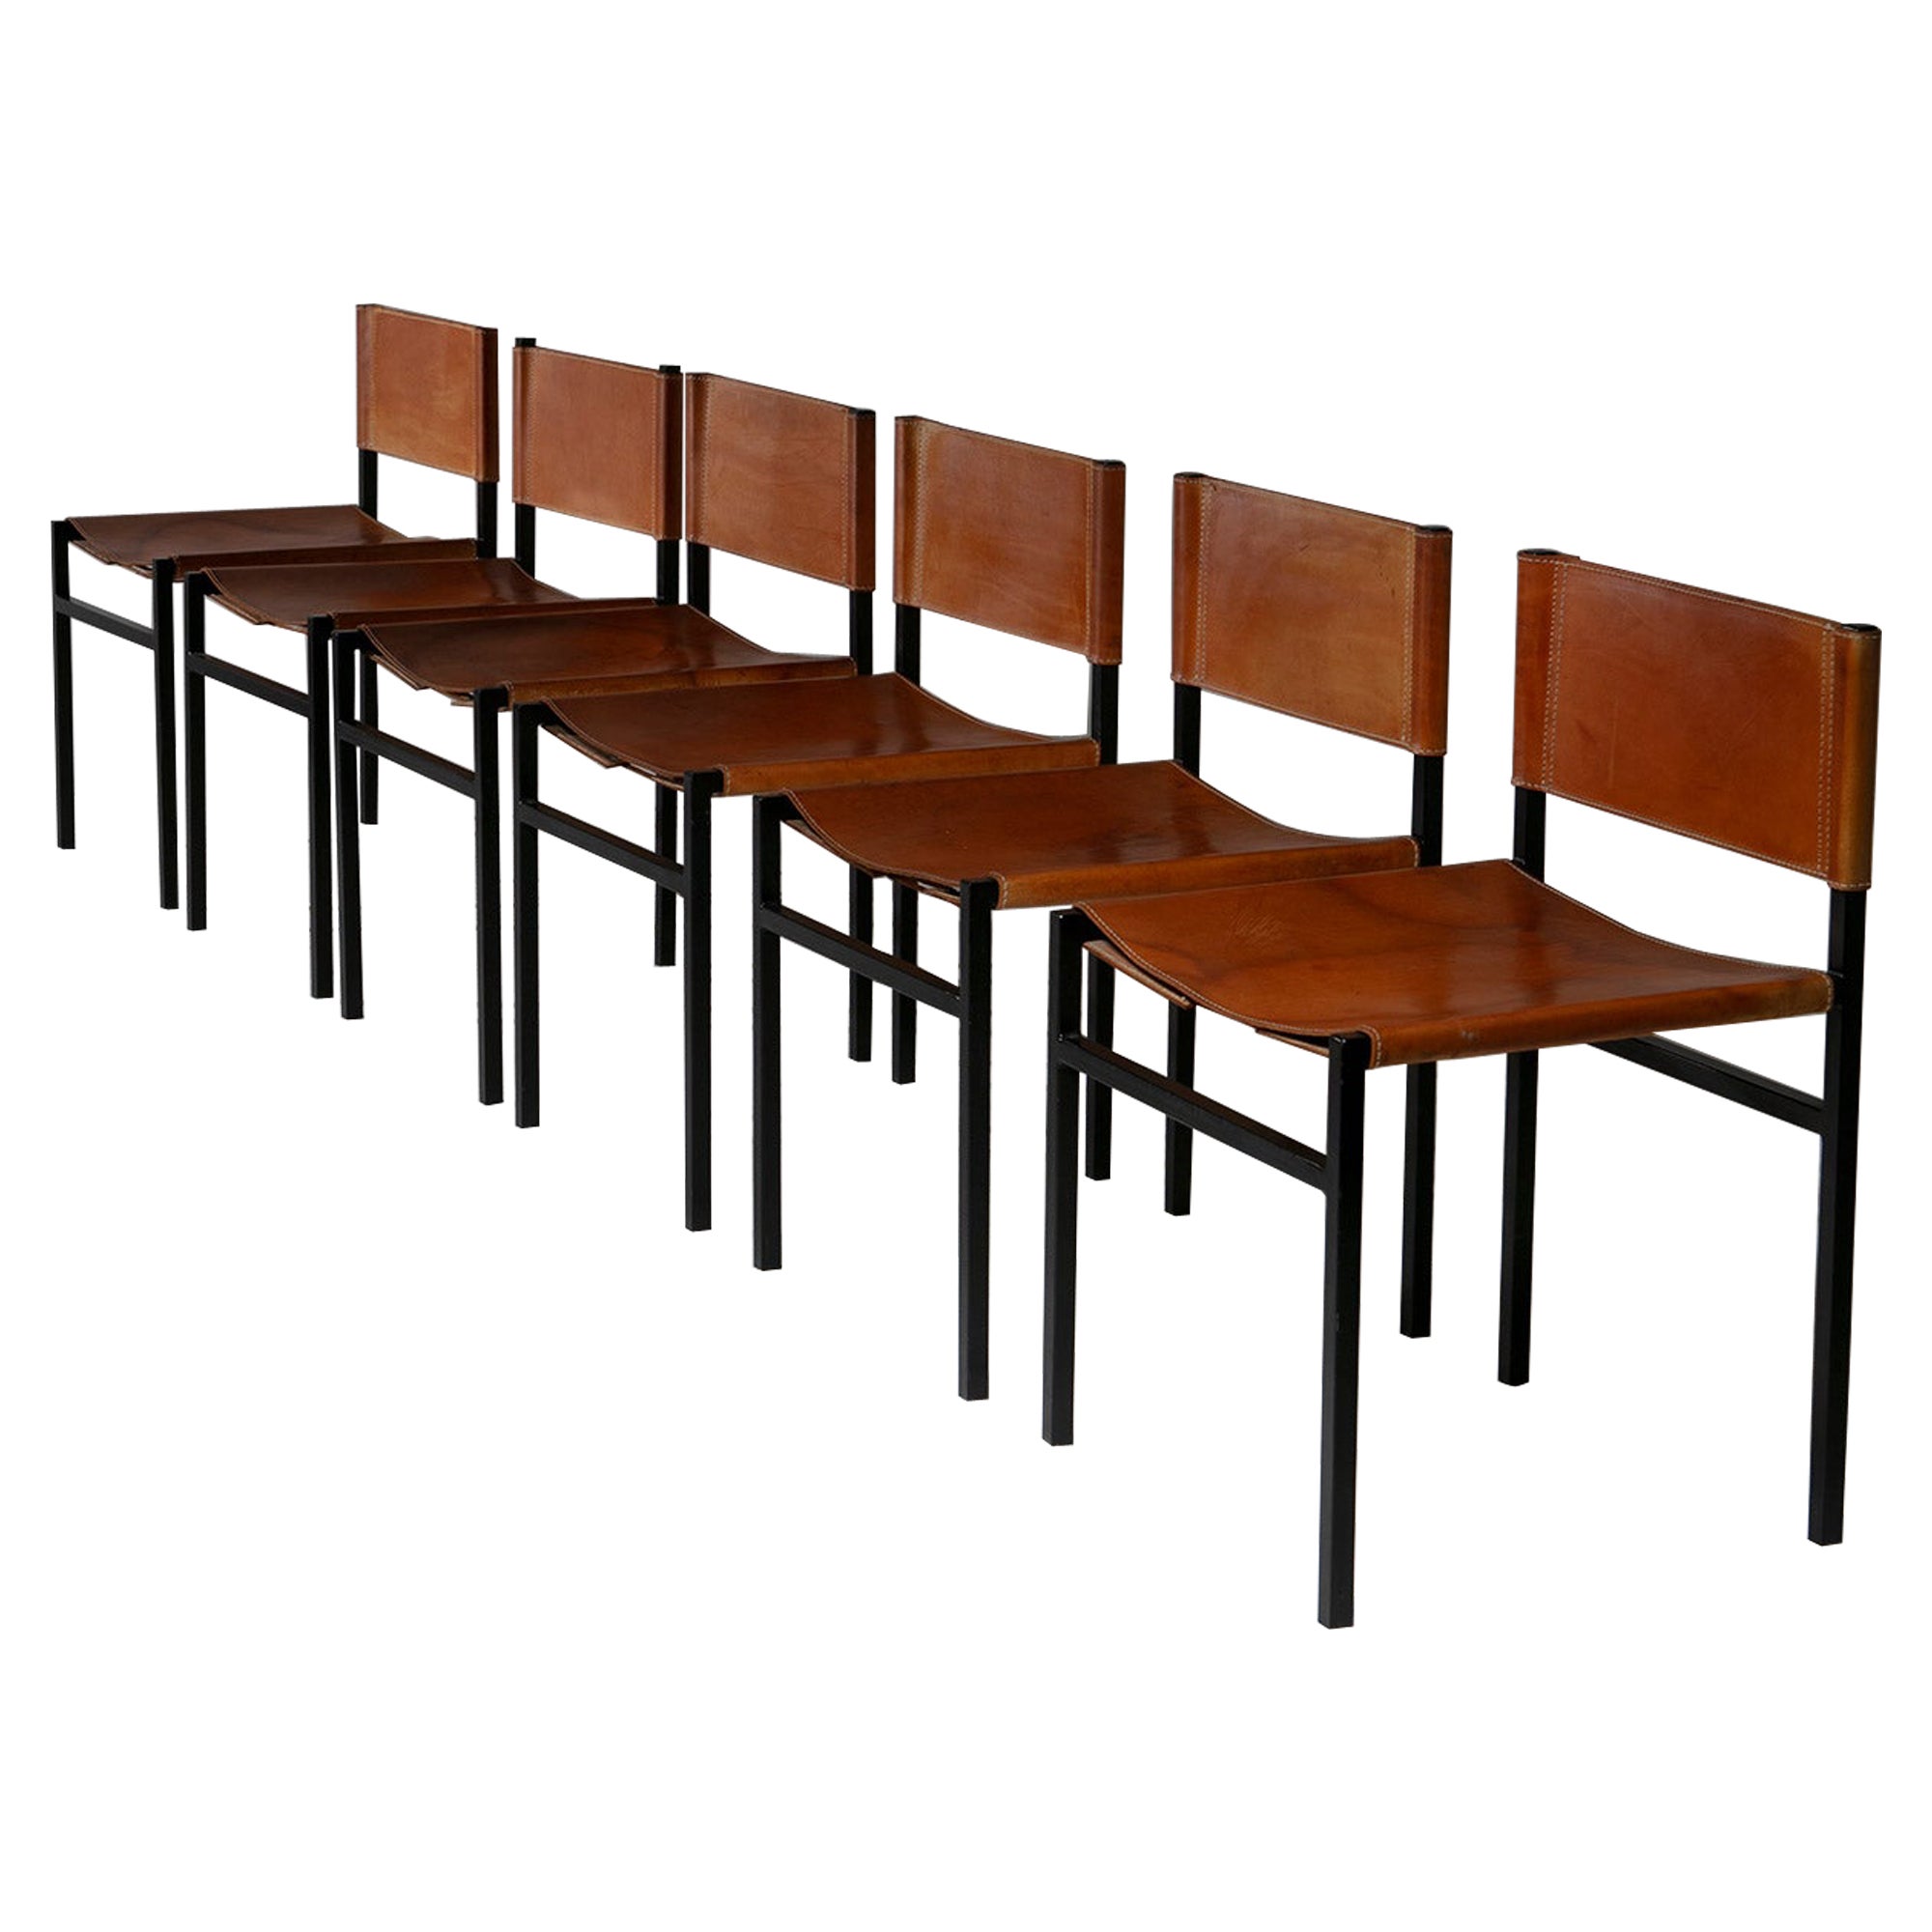 Set of Six Minimal "Rea" Leather Chairs by Paolo Tilche for Arform, Italy, 1950s For Sale